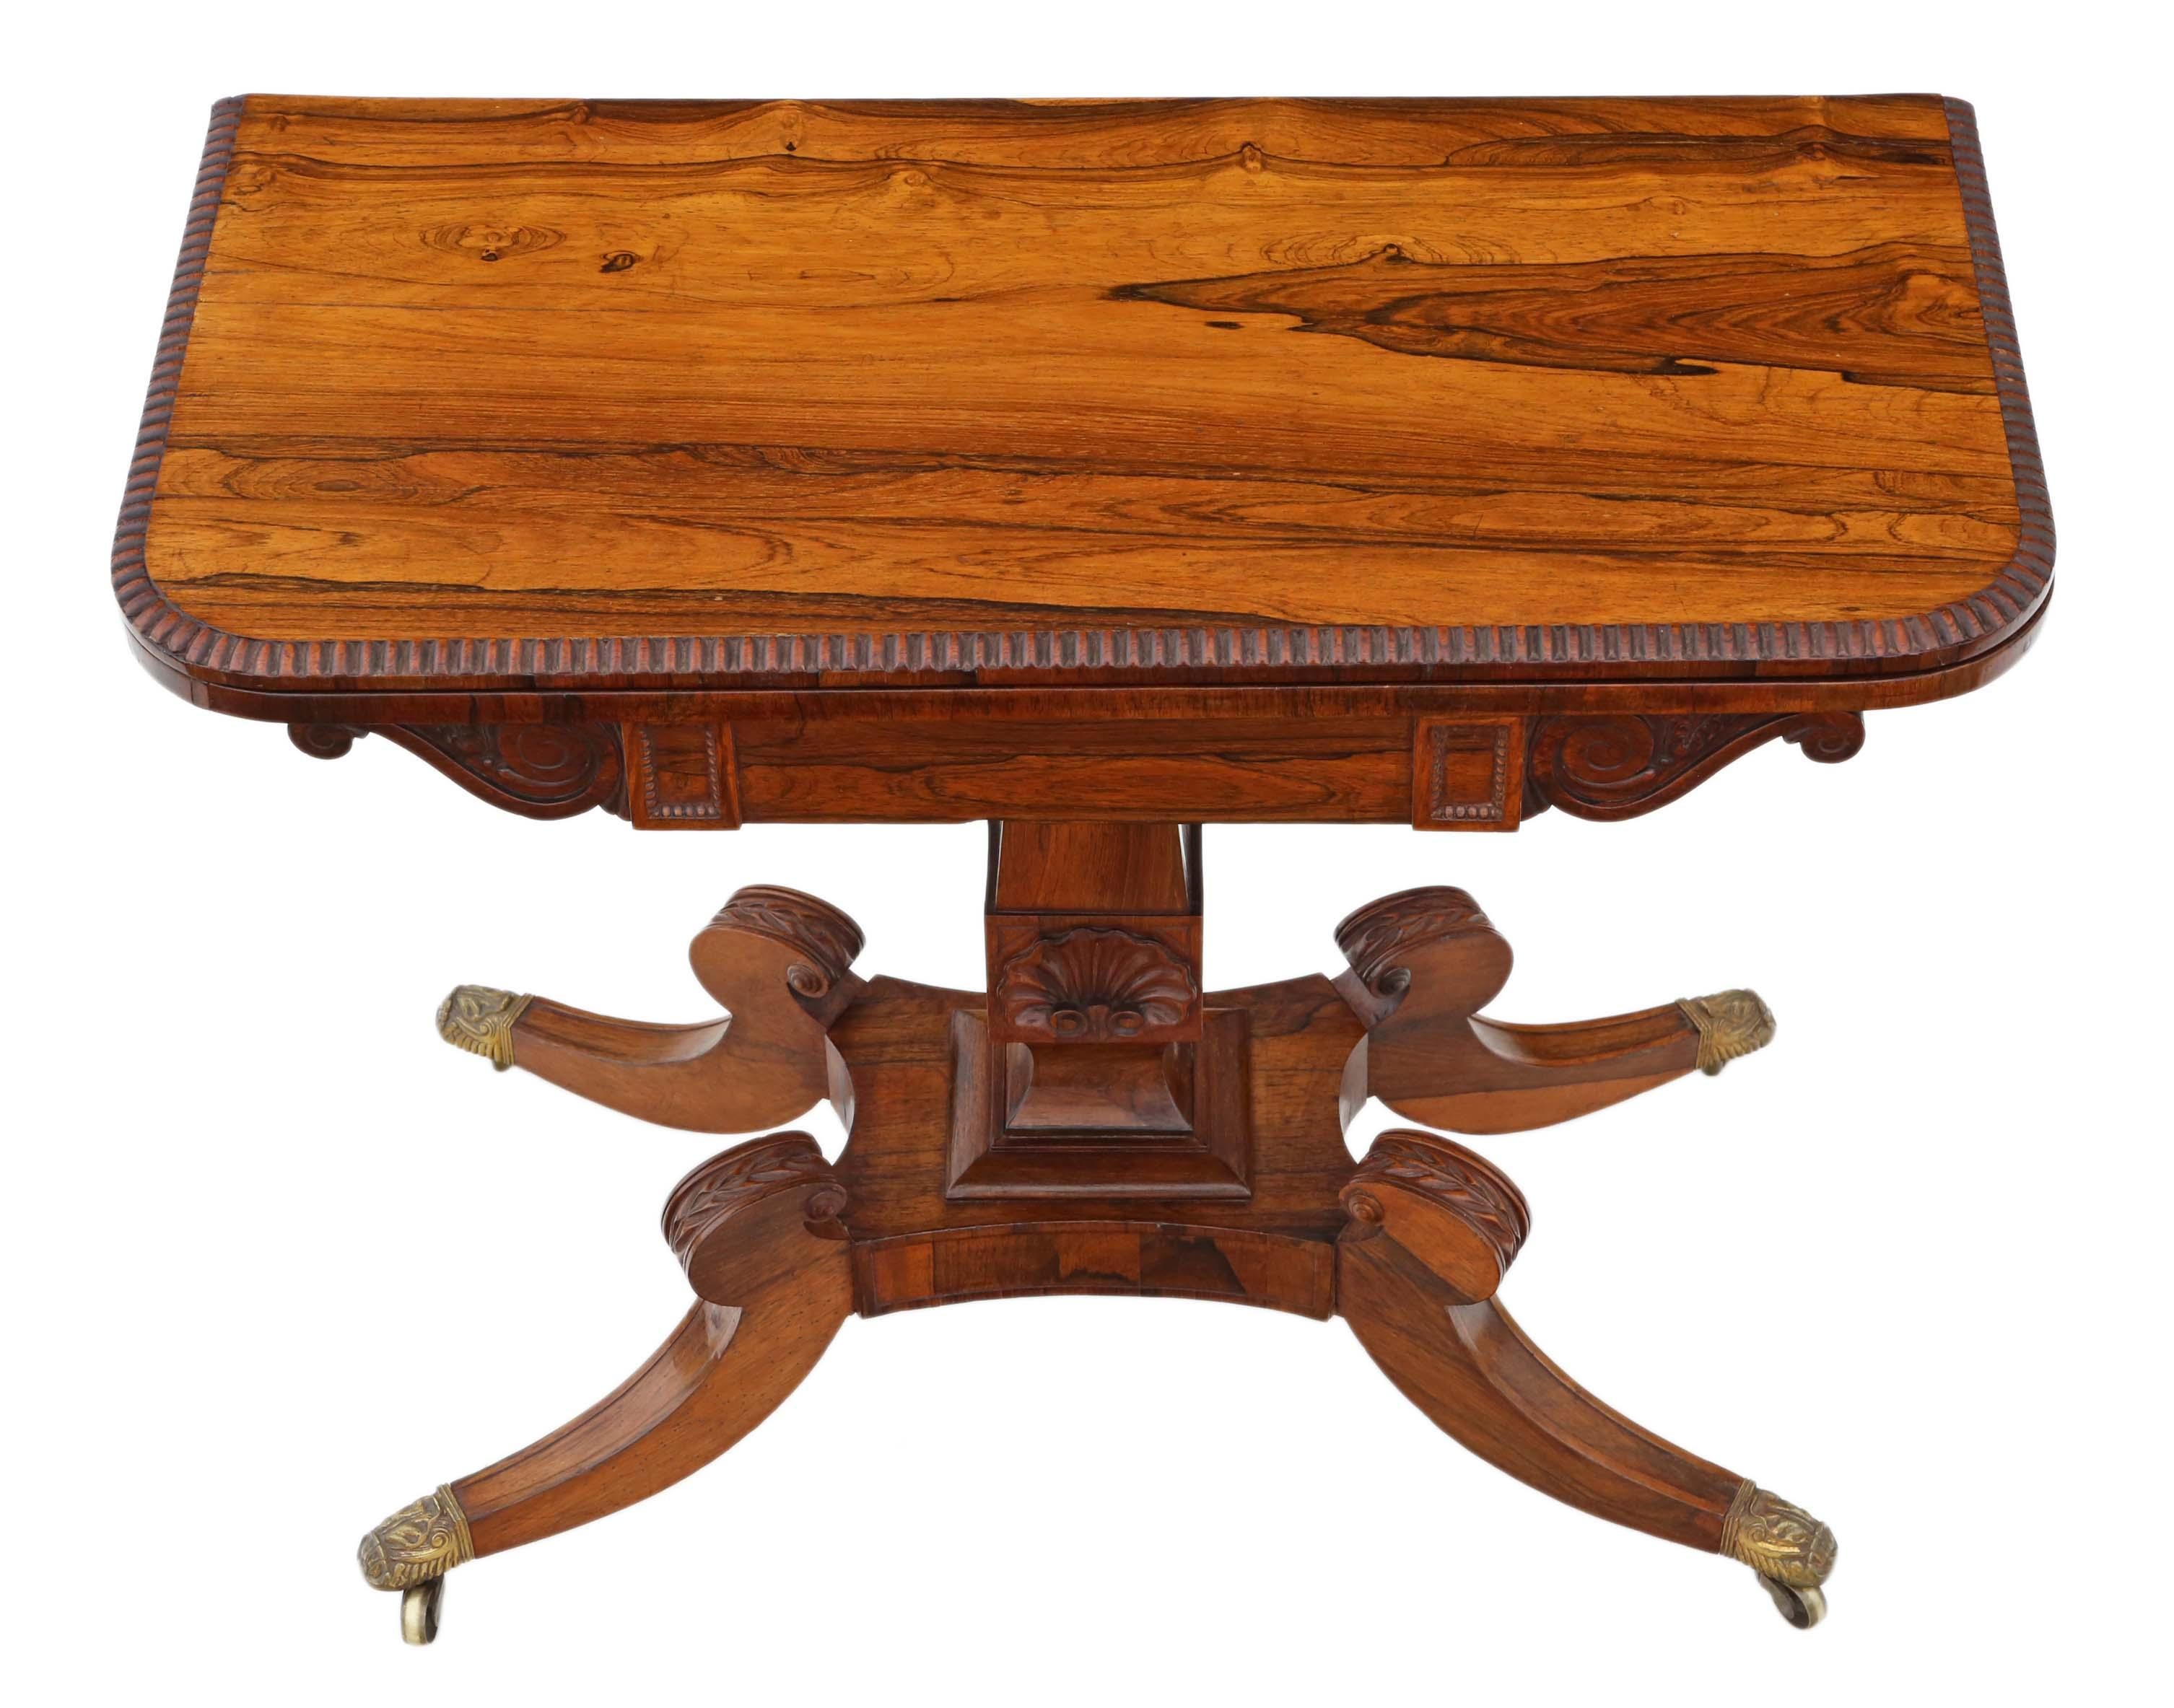 Antique fine quality Regency (circa 1825) rosewood folding tea or console table.
This is a lovely table of exceptional quality.
Solid, with no loose joints.
Brass castors.
The table has a wonderful patina and elegant pedestal base.
Lovely age